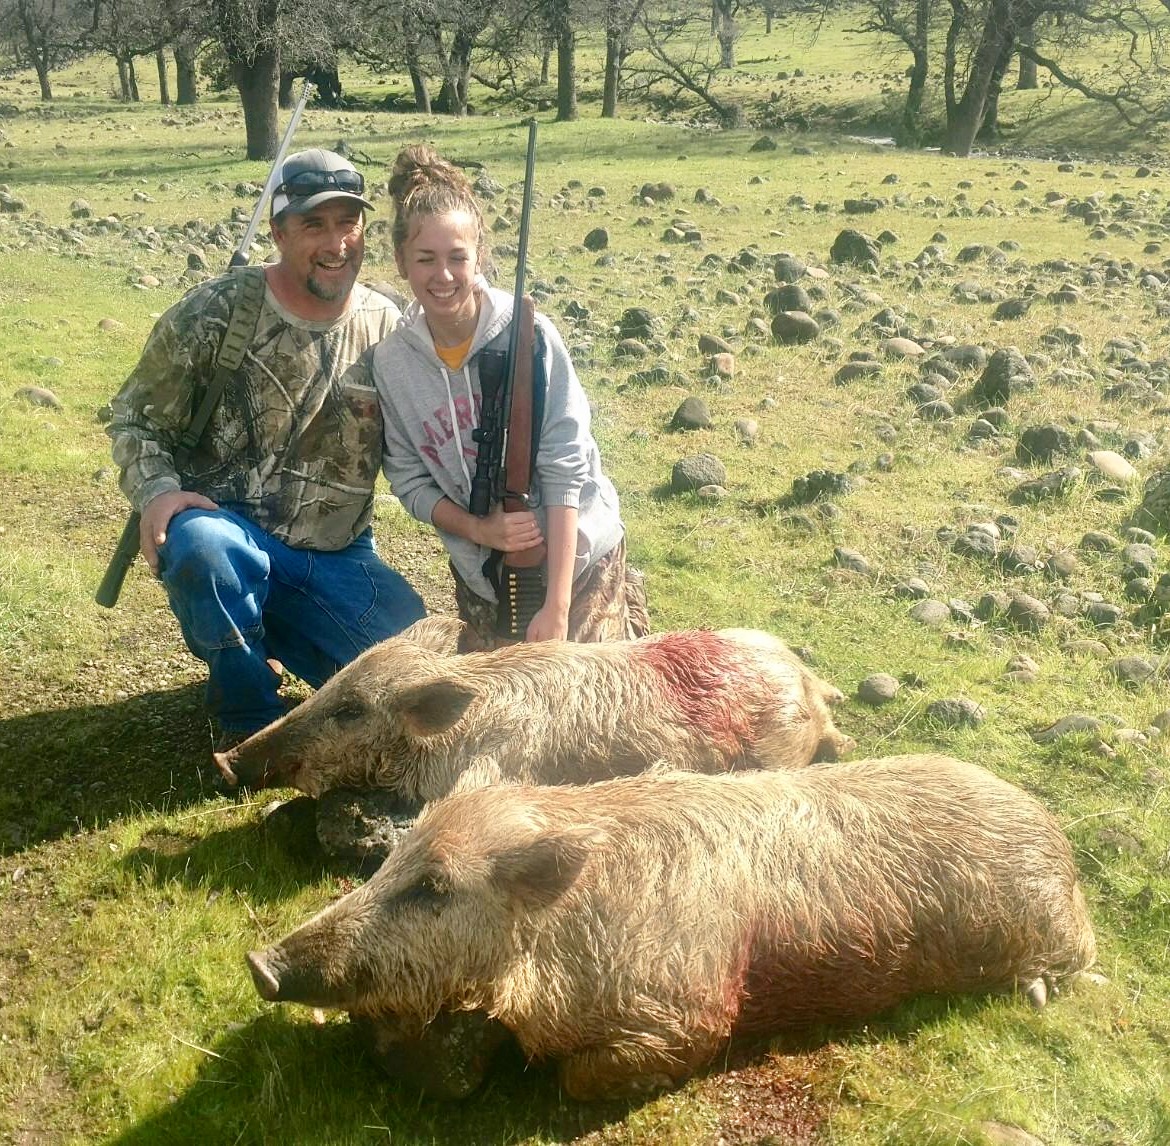 Mike and his daughter with her first pig